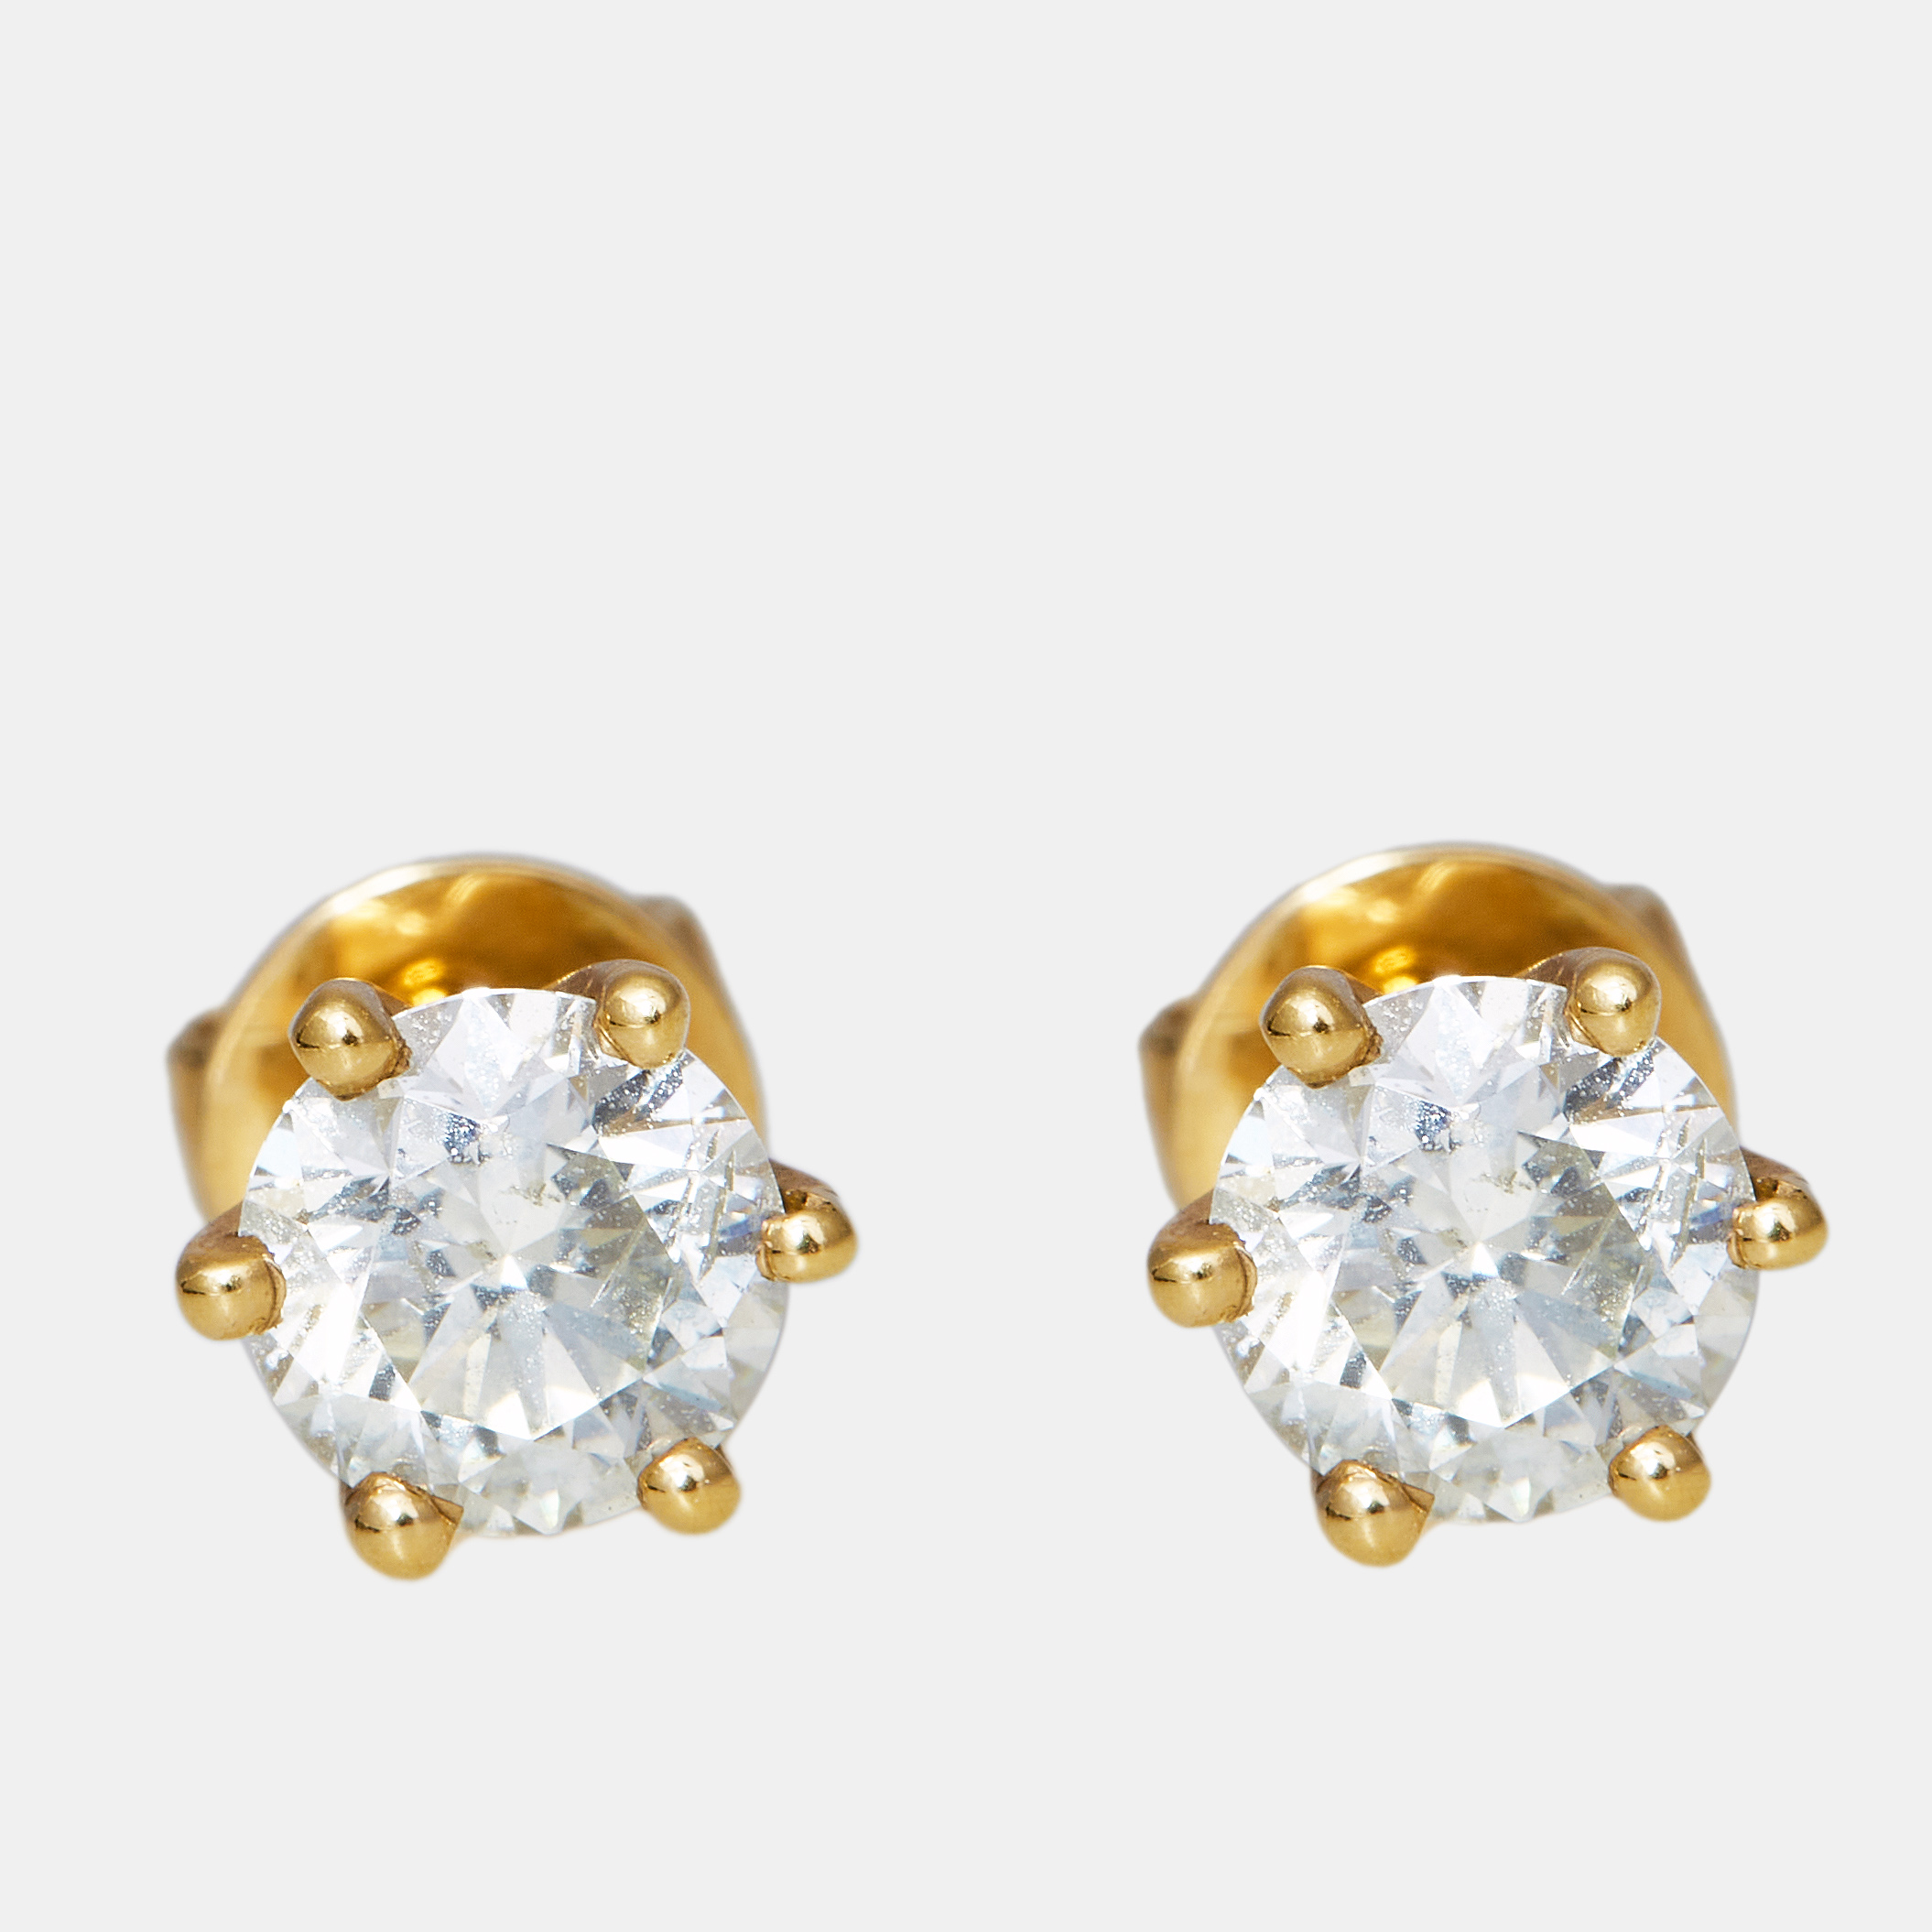 Youll love wearing this pair of diamond earrings season after season. Minimal and luxurious its a worthy investment.